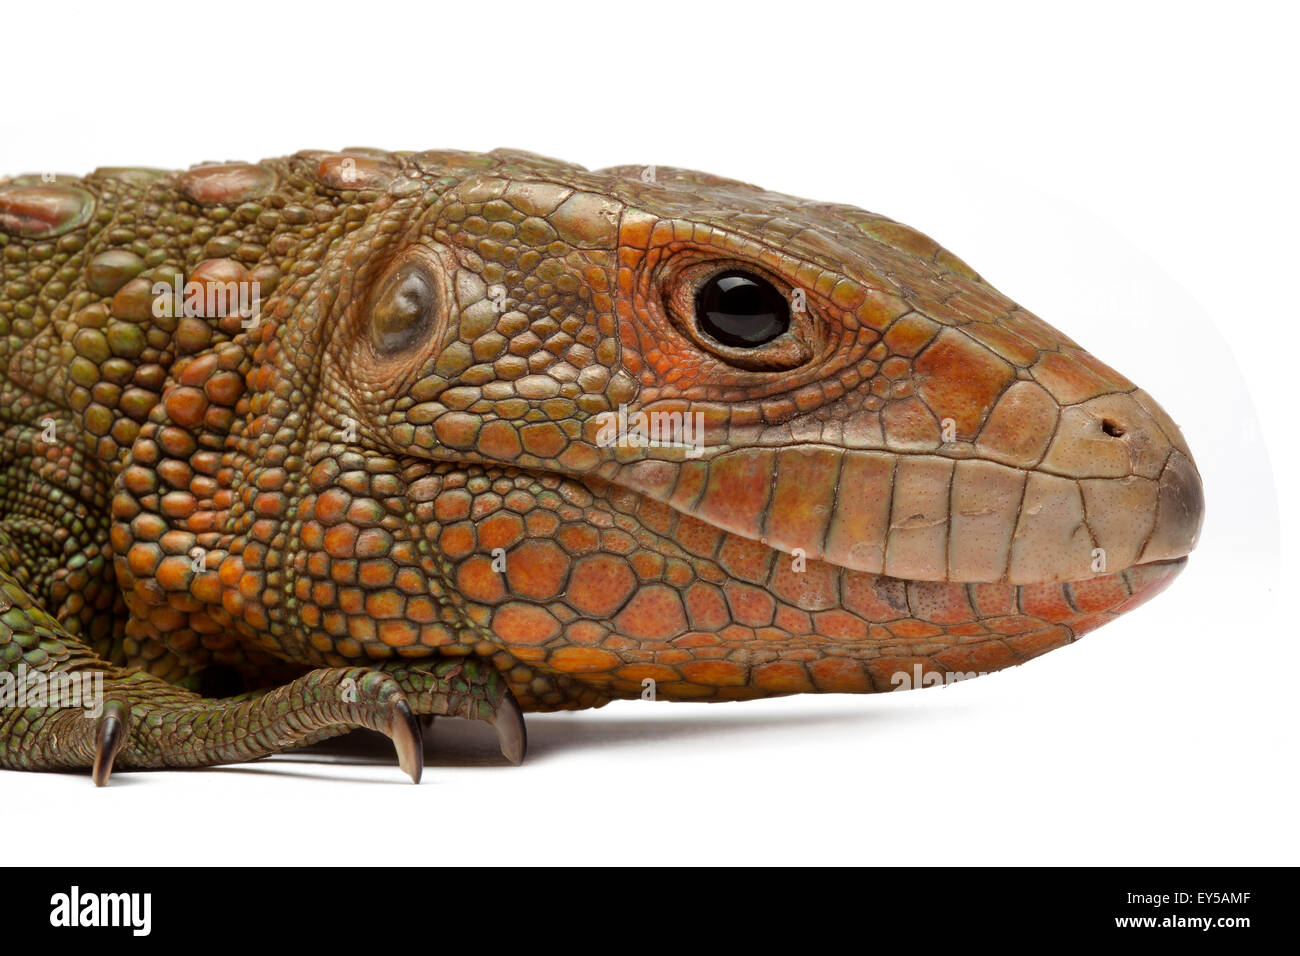 Portrait of Guyana Caiman Lizard on white background Native to South America Stock Photo